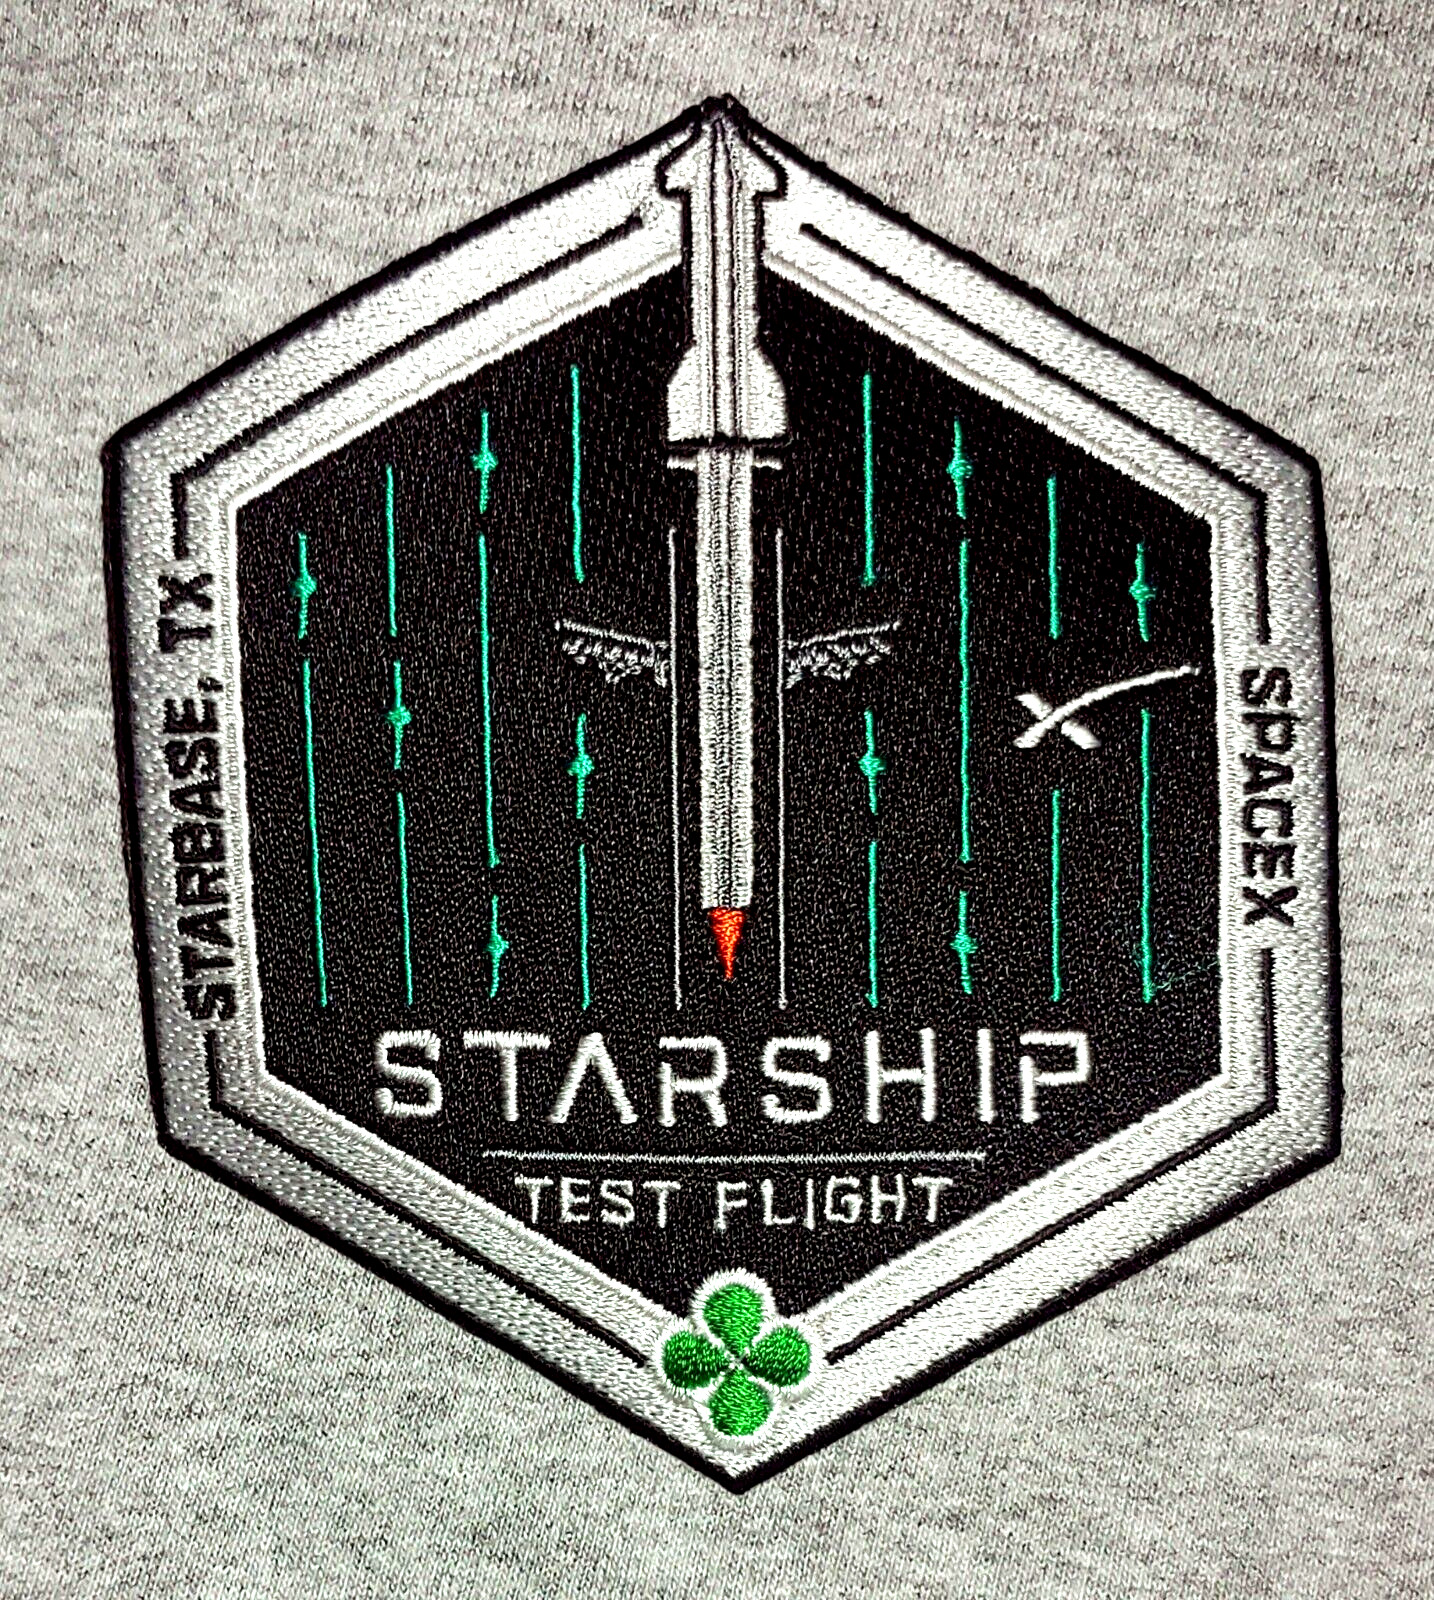 Authentic SPACEX -STARSHIP TEST FLIGHT-SUPER HEAVY- STARBASE, TX- EMPLOYEE Patch